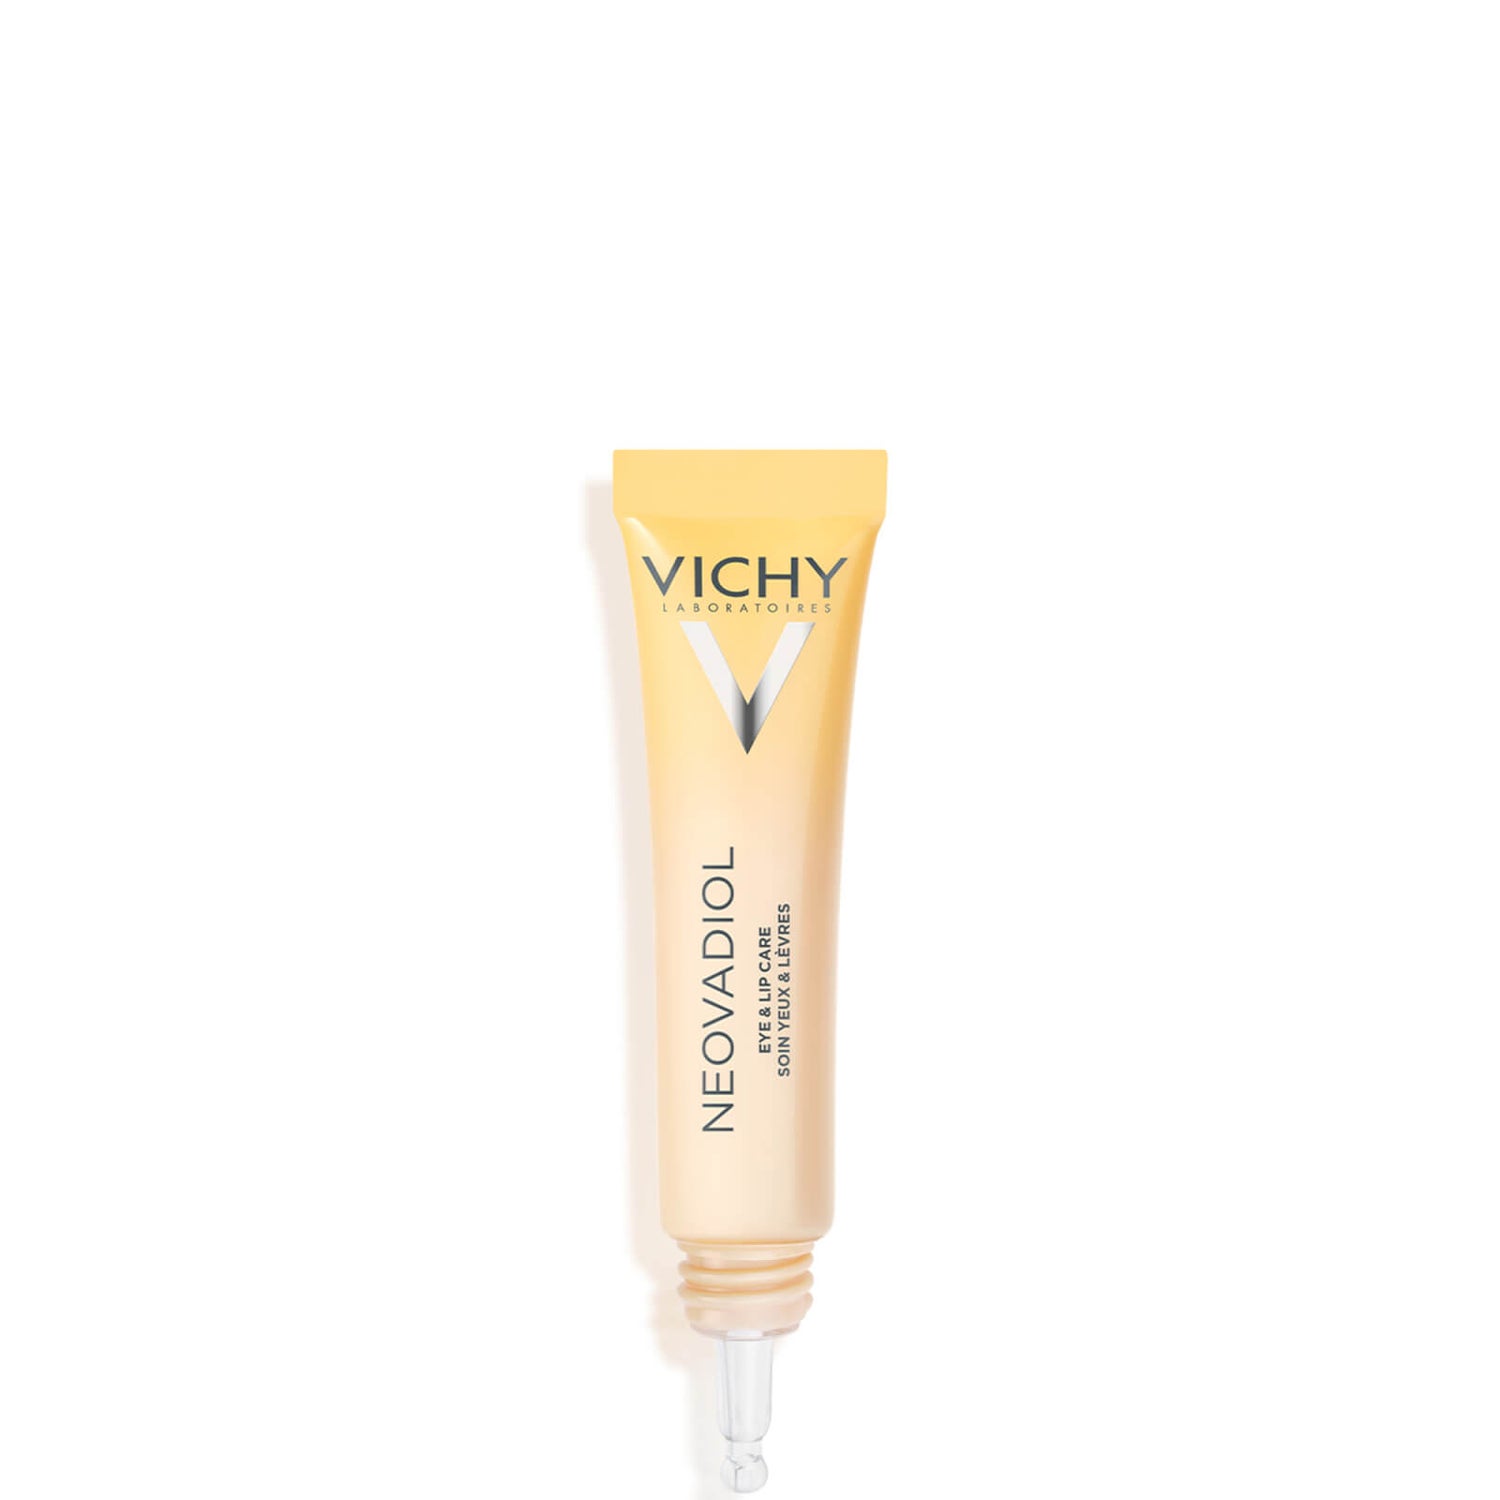 Vichy Neovadiol Multi-Corrective Eye and Lip Care for Perimenopause and Menopause 15ml